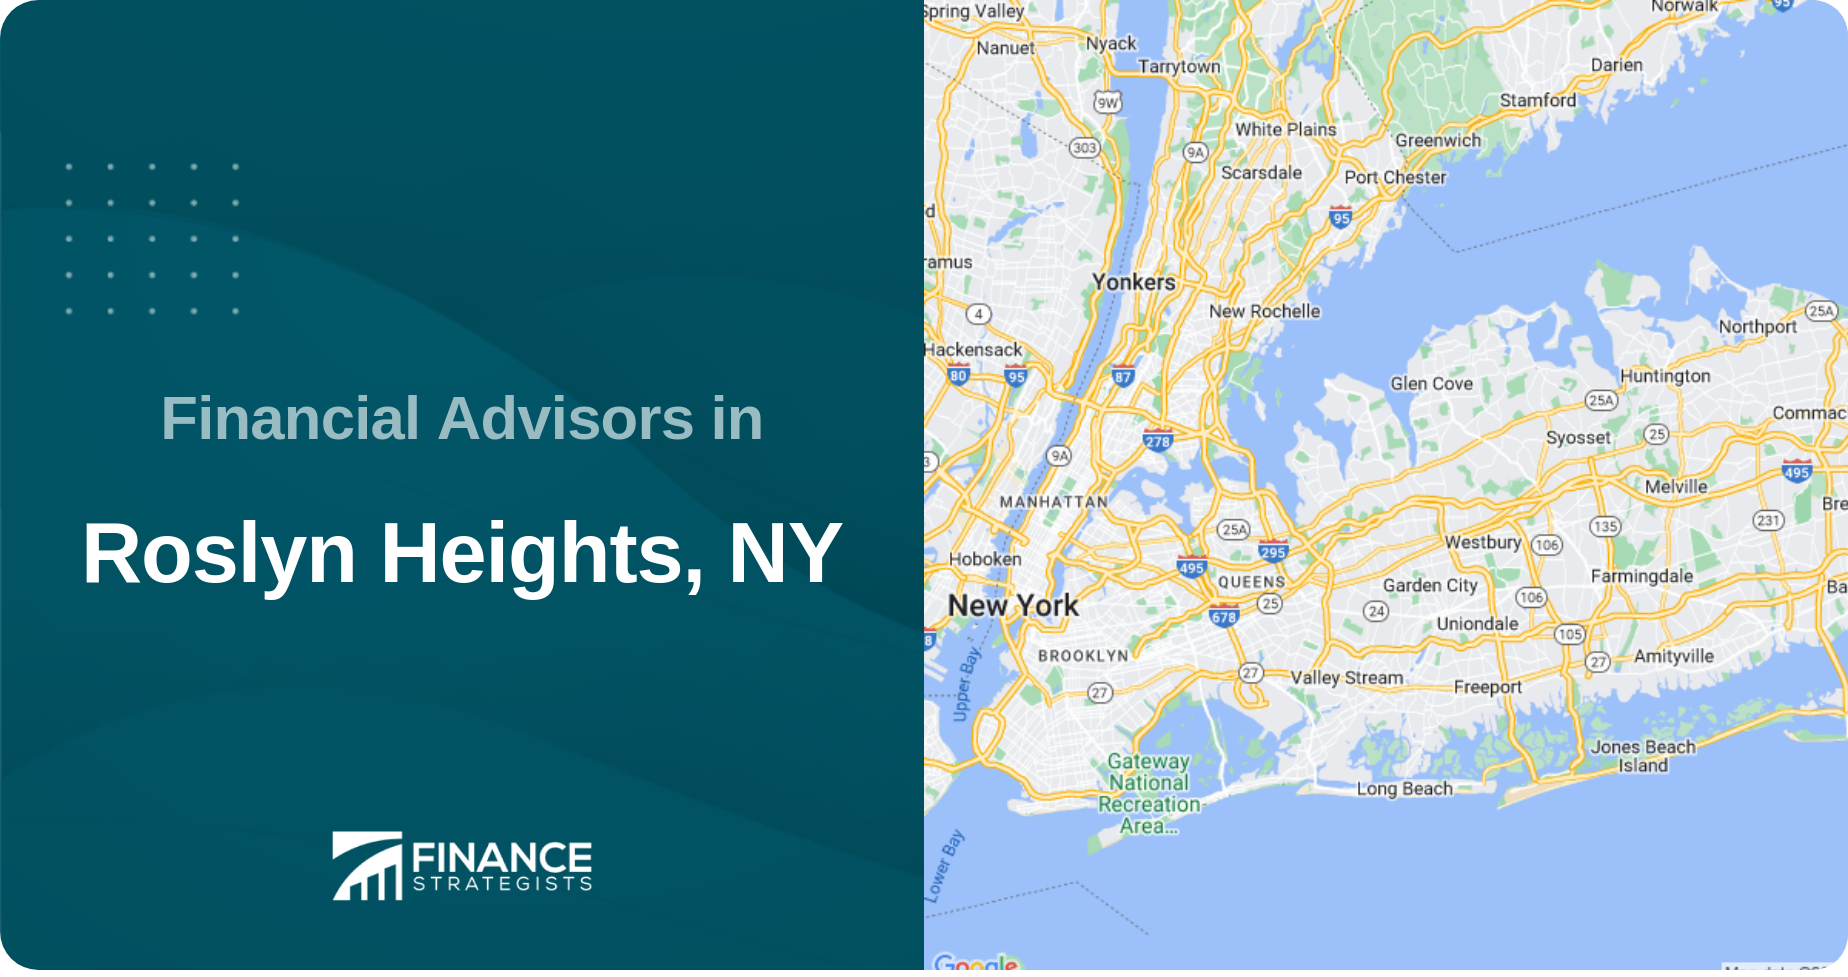 Financial Advisors in Roslyn Heights, NY